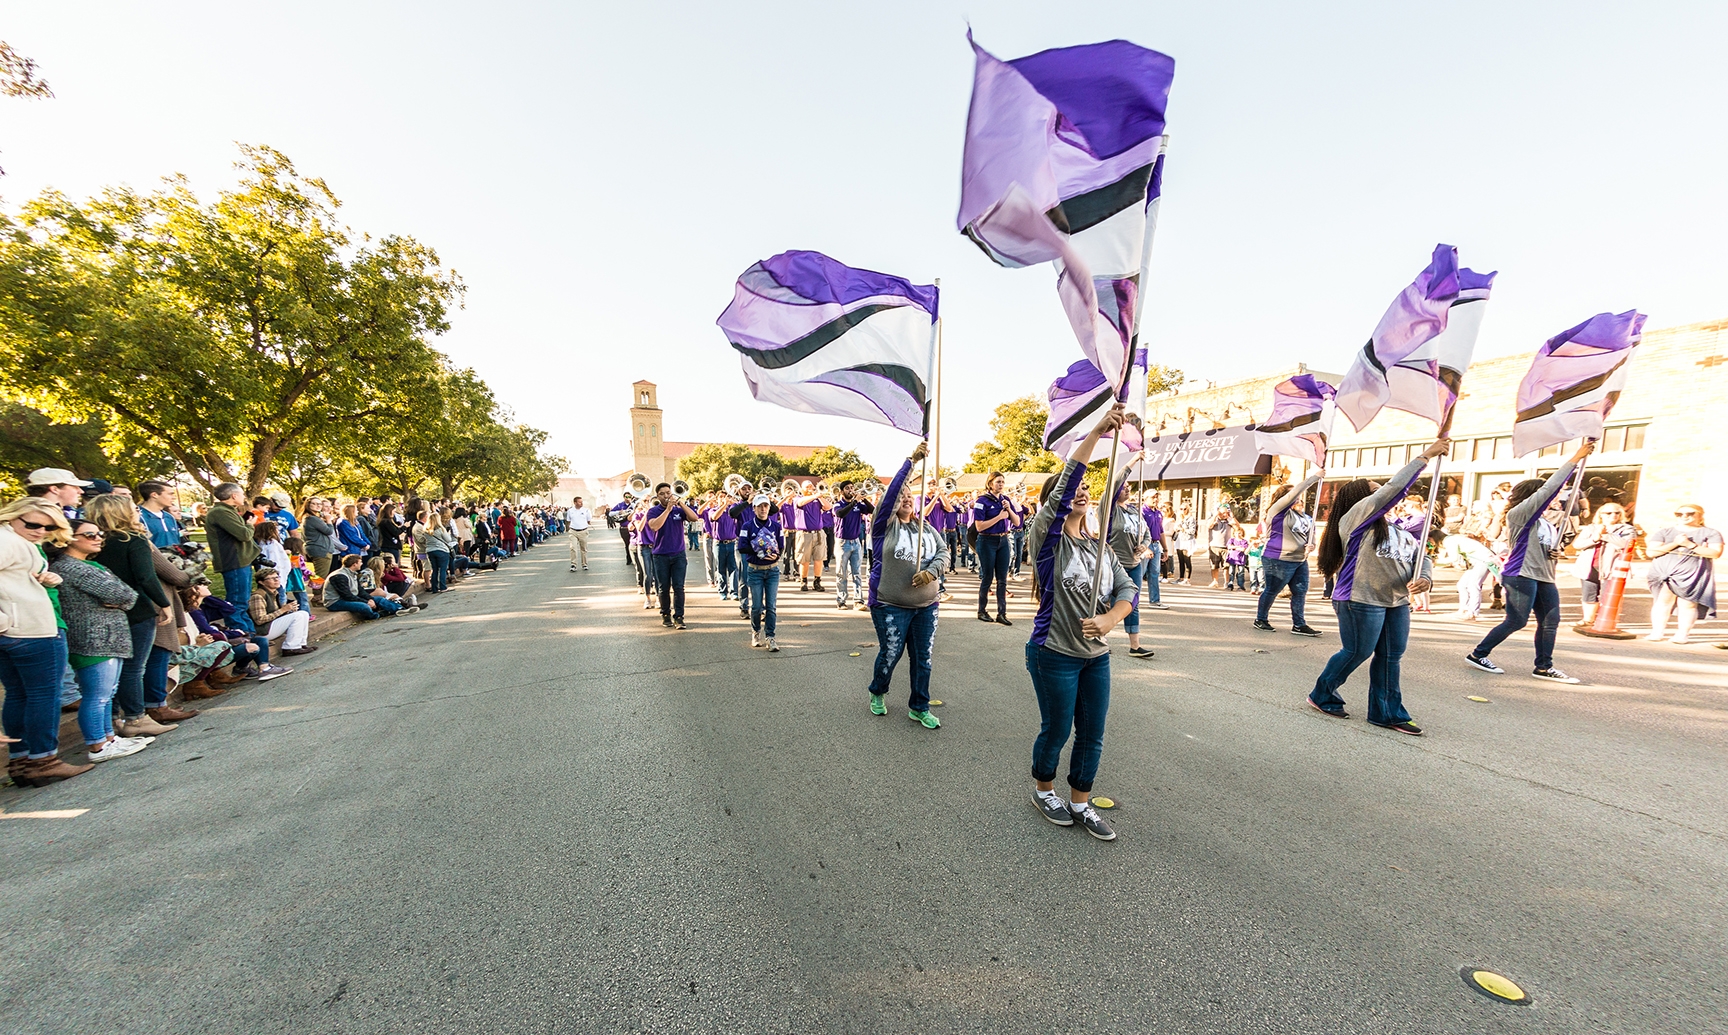 Students in a parade waving ACU flags